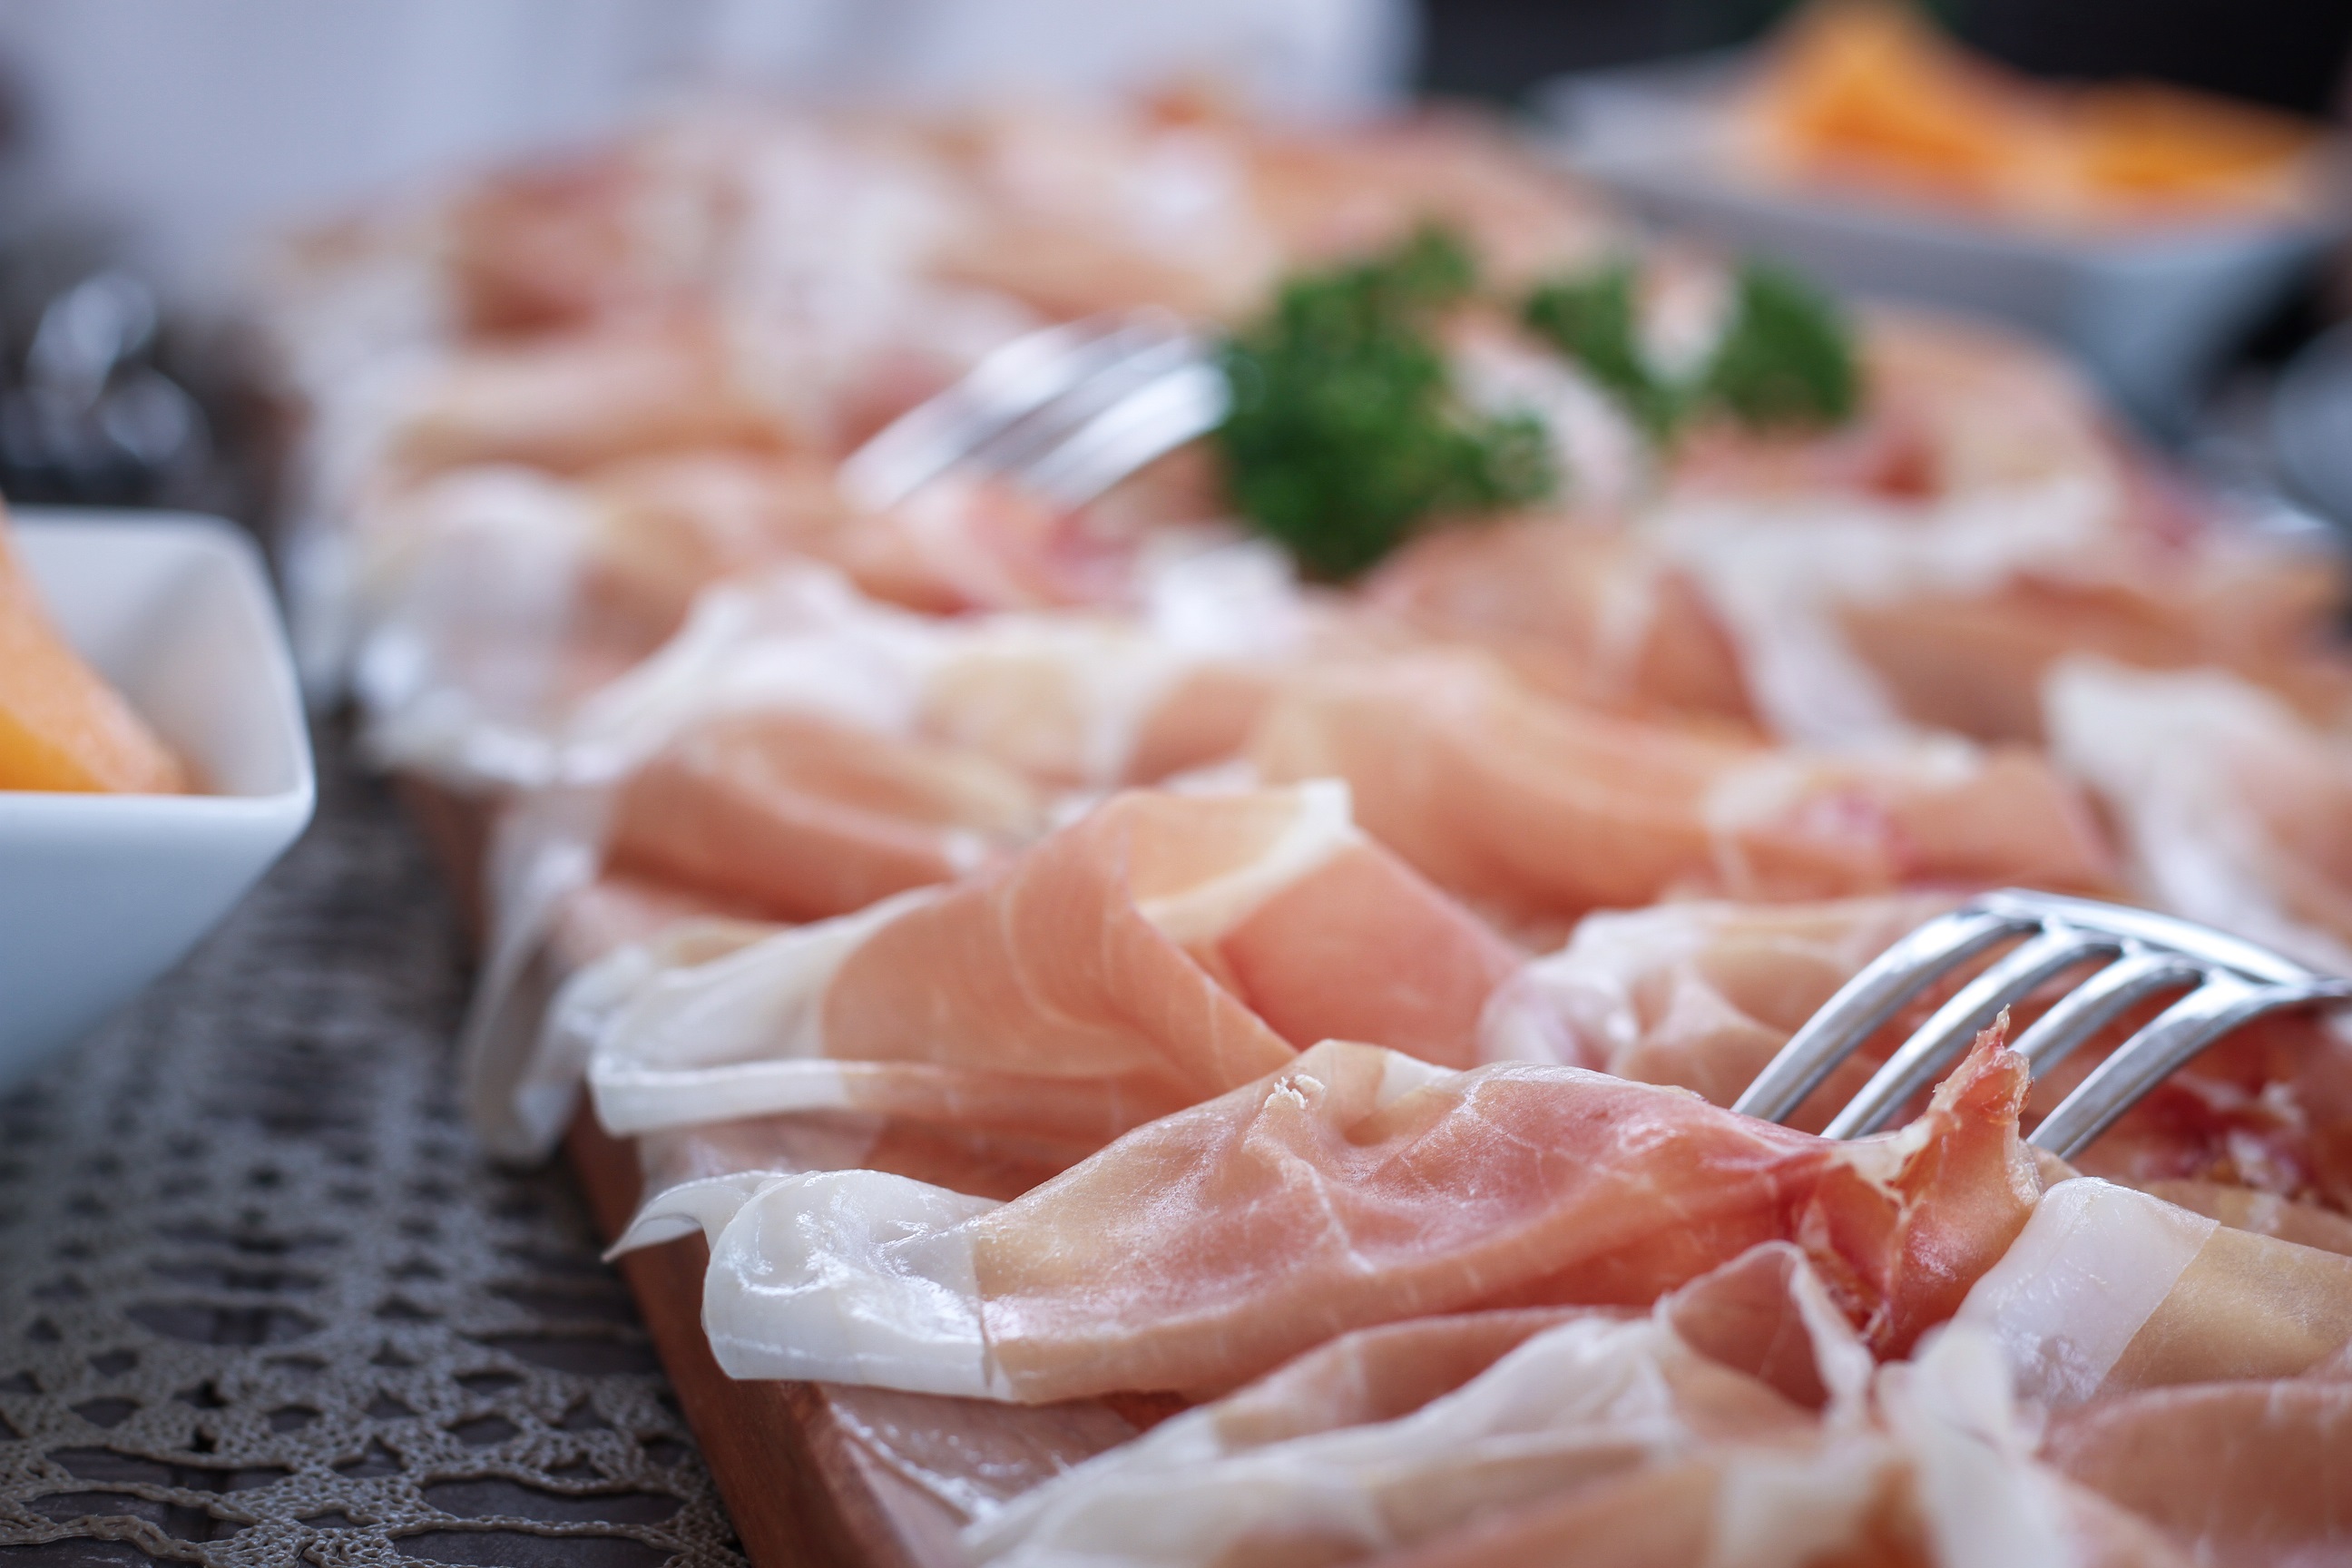 The history of prosciutto in San Daniele – the tradition and heritage that goes back centuries